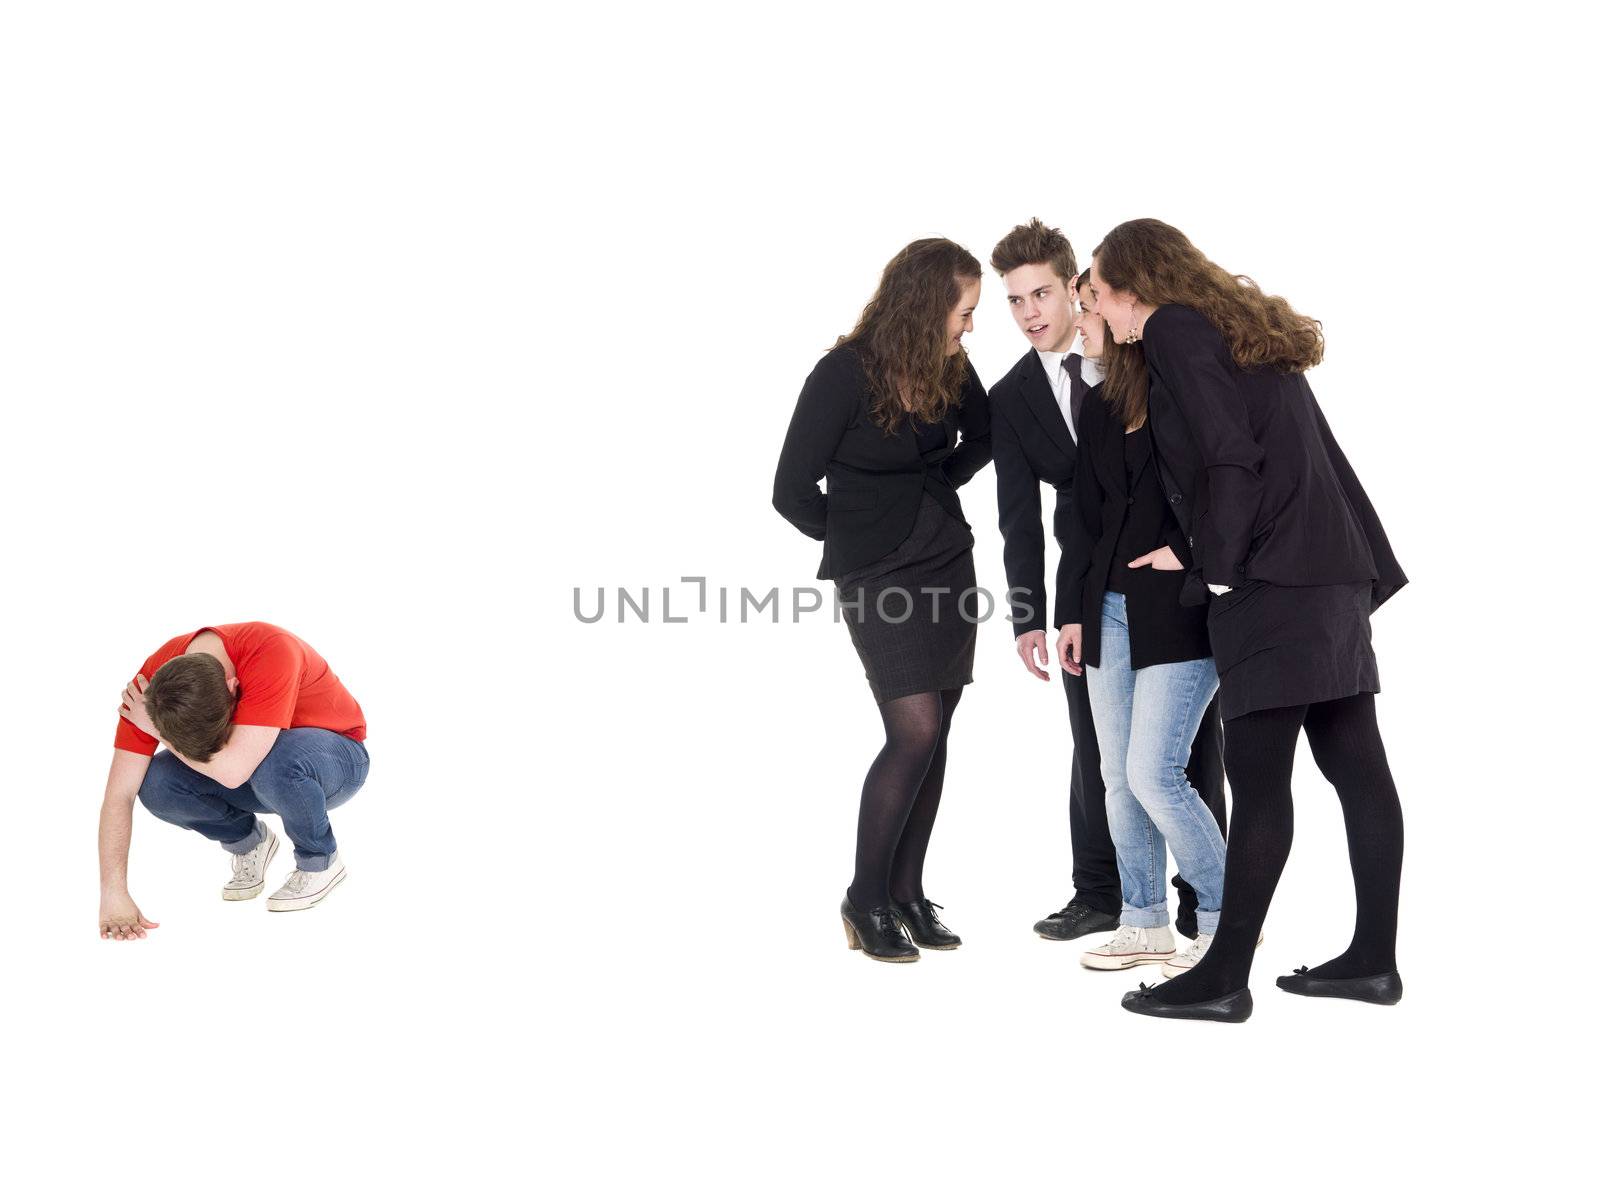 Young man rejected from the group isolated on white background